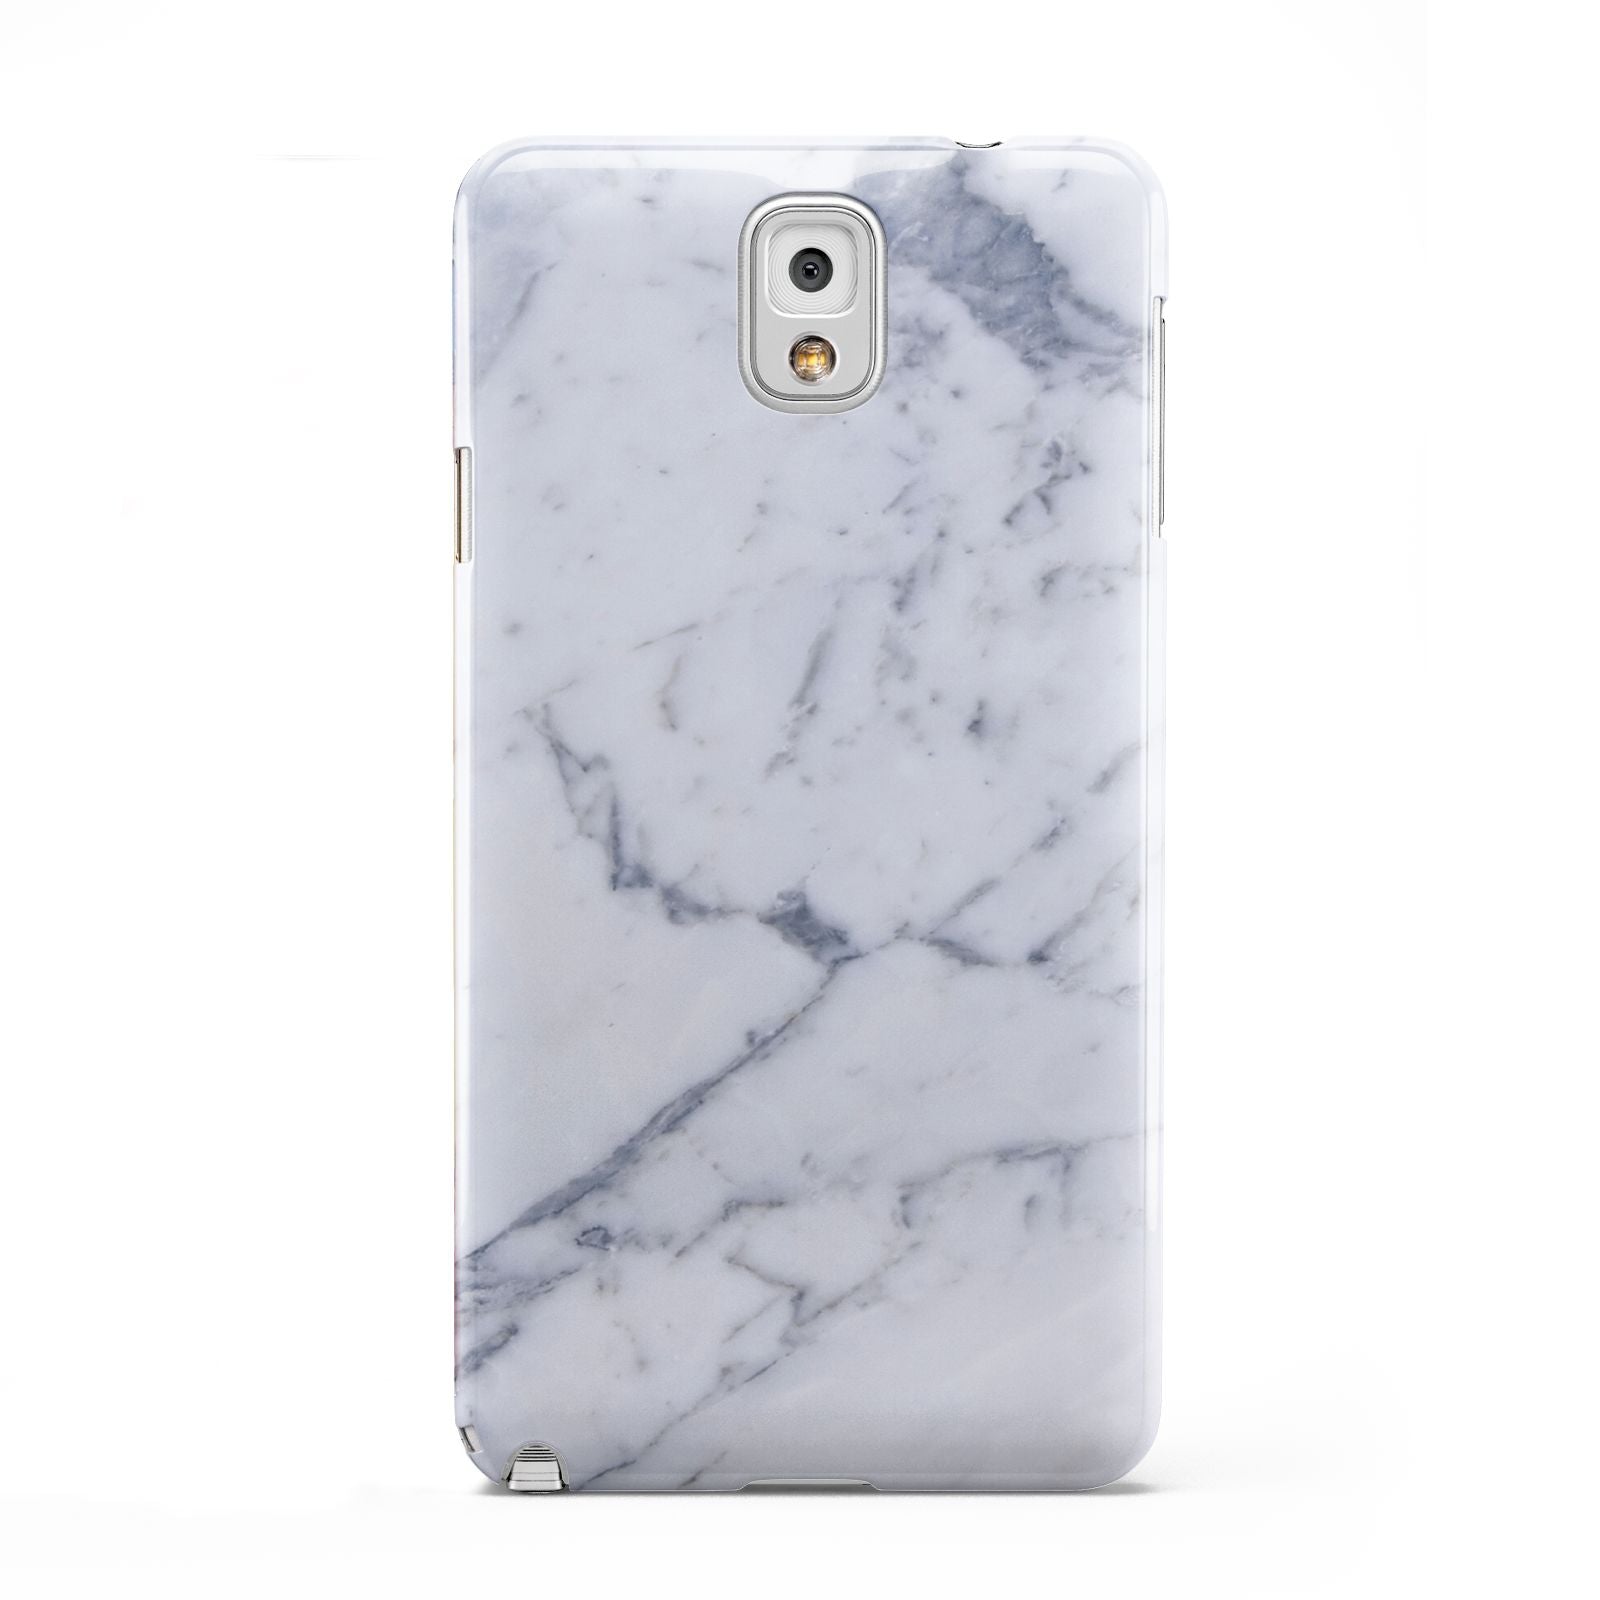 Faux Marble Grey White Samsung Galaxy Note 3 Case